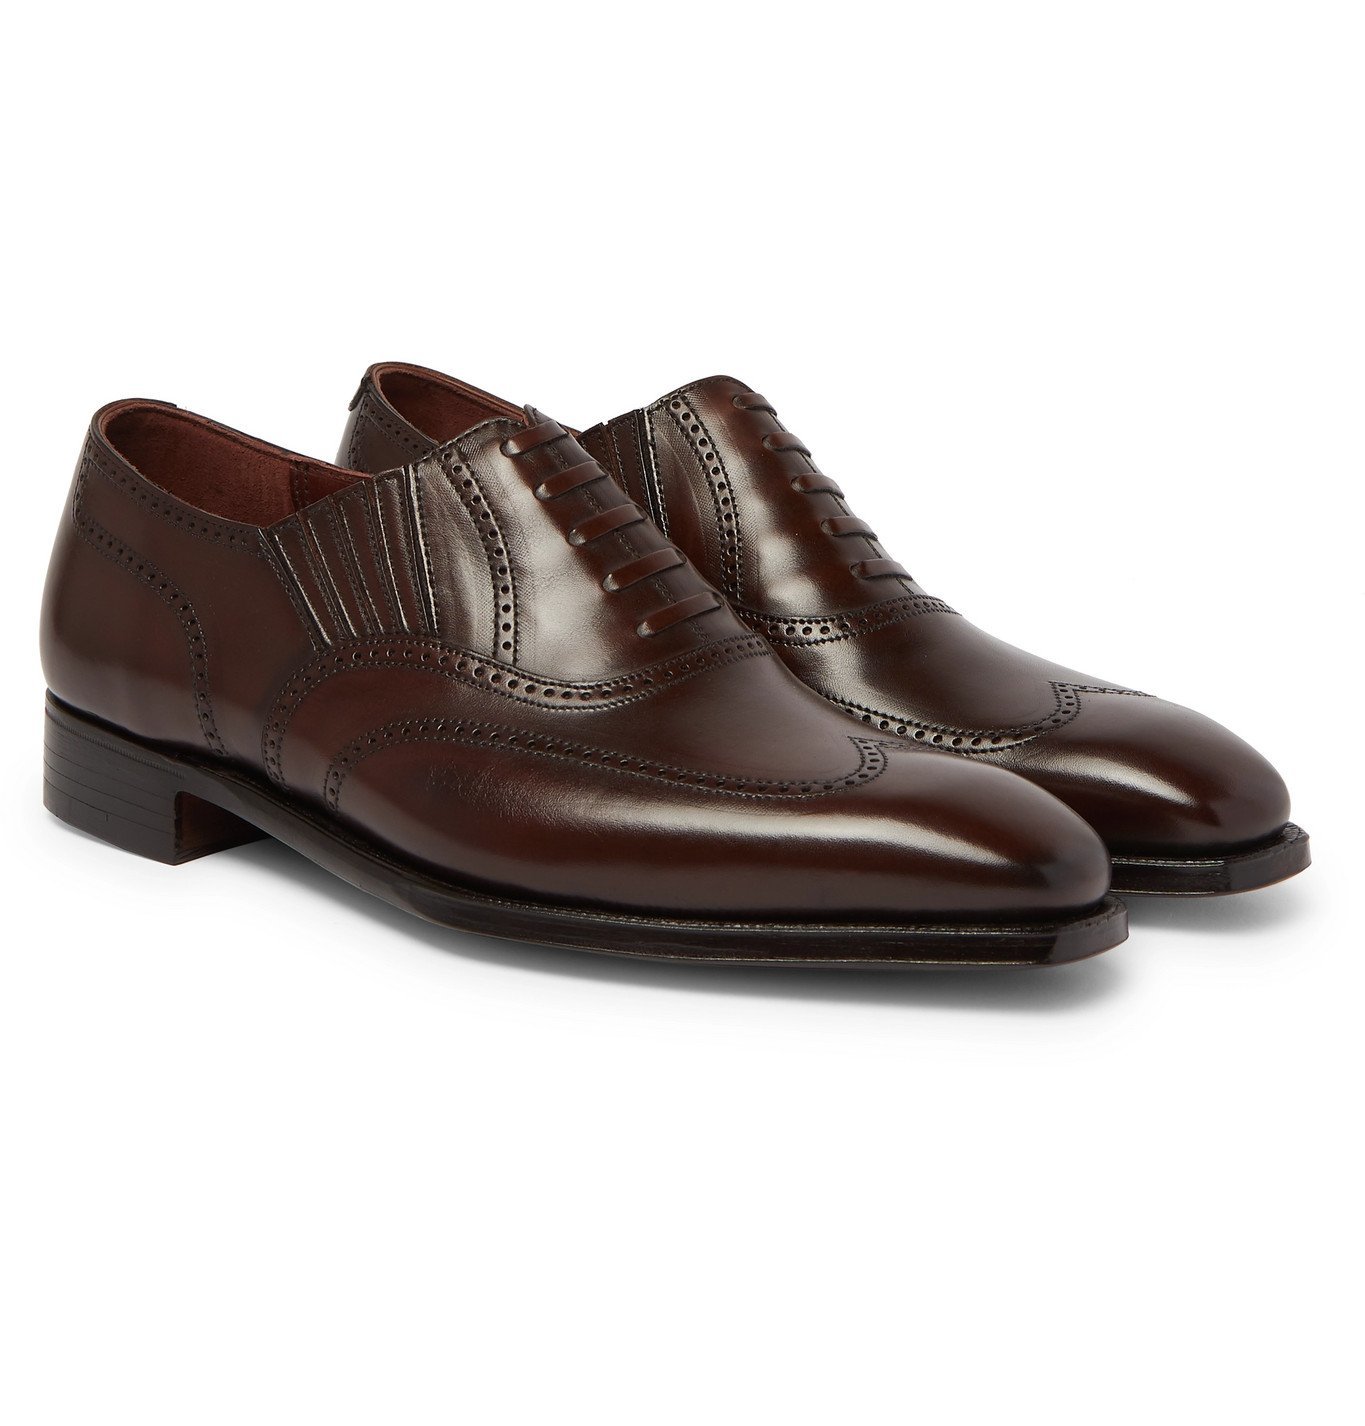 George Cleverley - Winston Leather Oxford Brogues - Brown George Cleverley